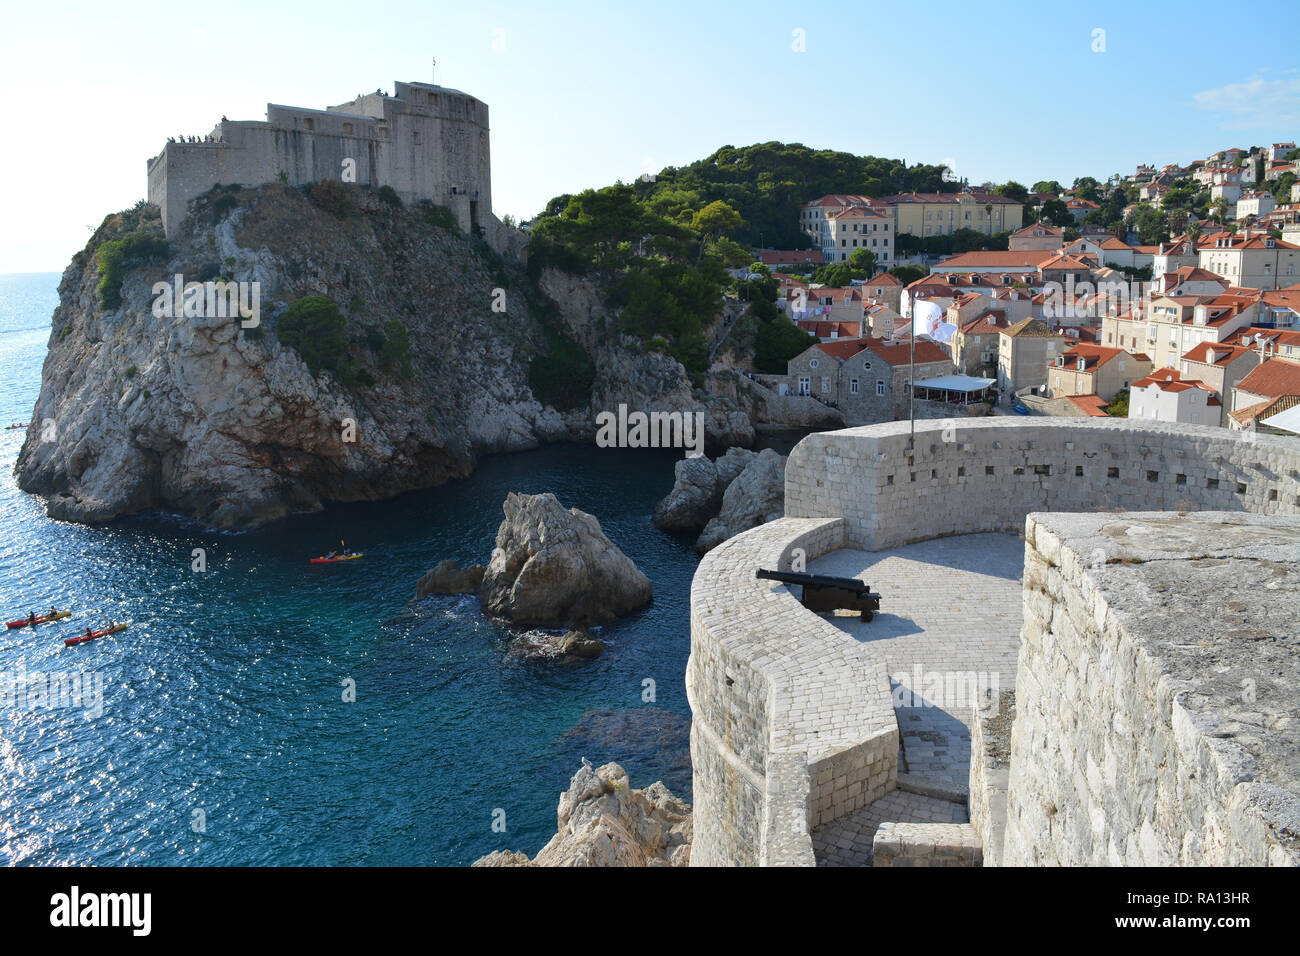 View of cannon and Fort Lawrence, cove and town outside old town dubrovnik city walls Stock Photo